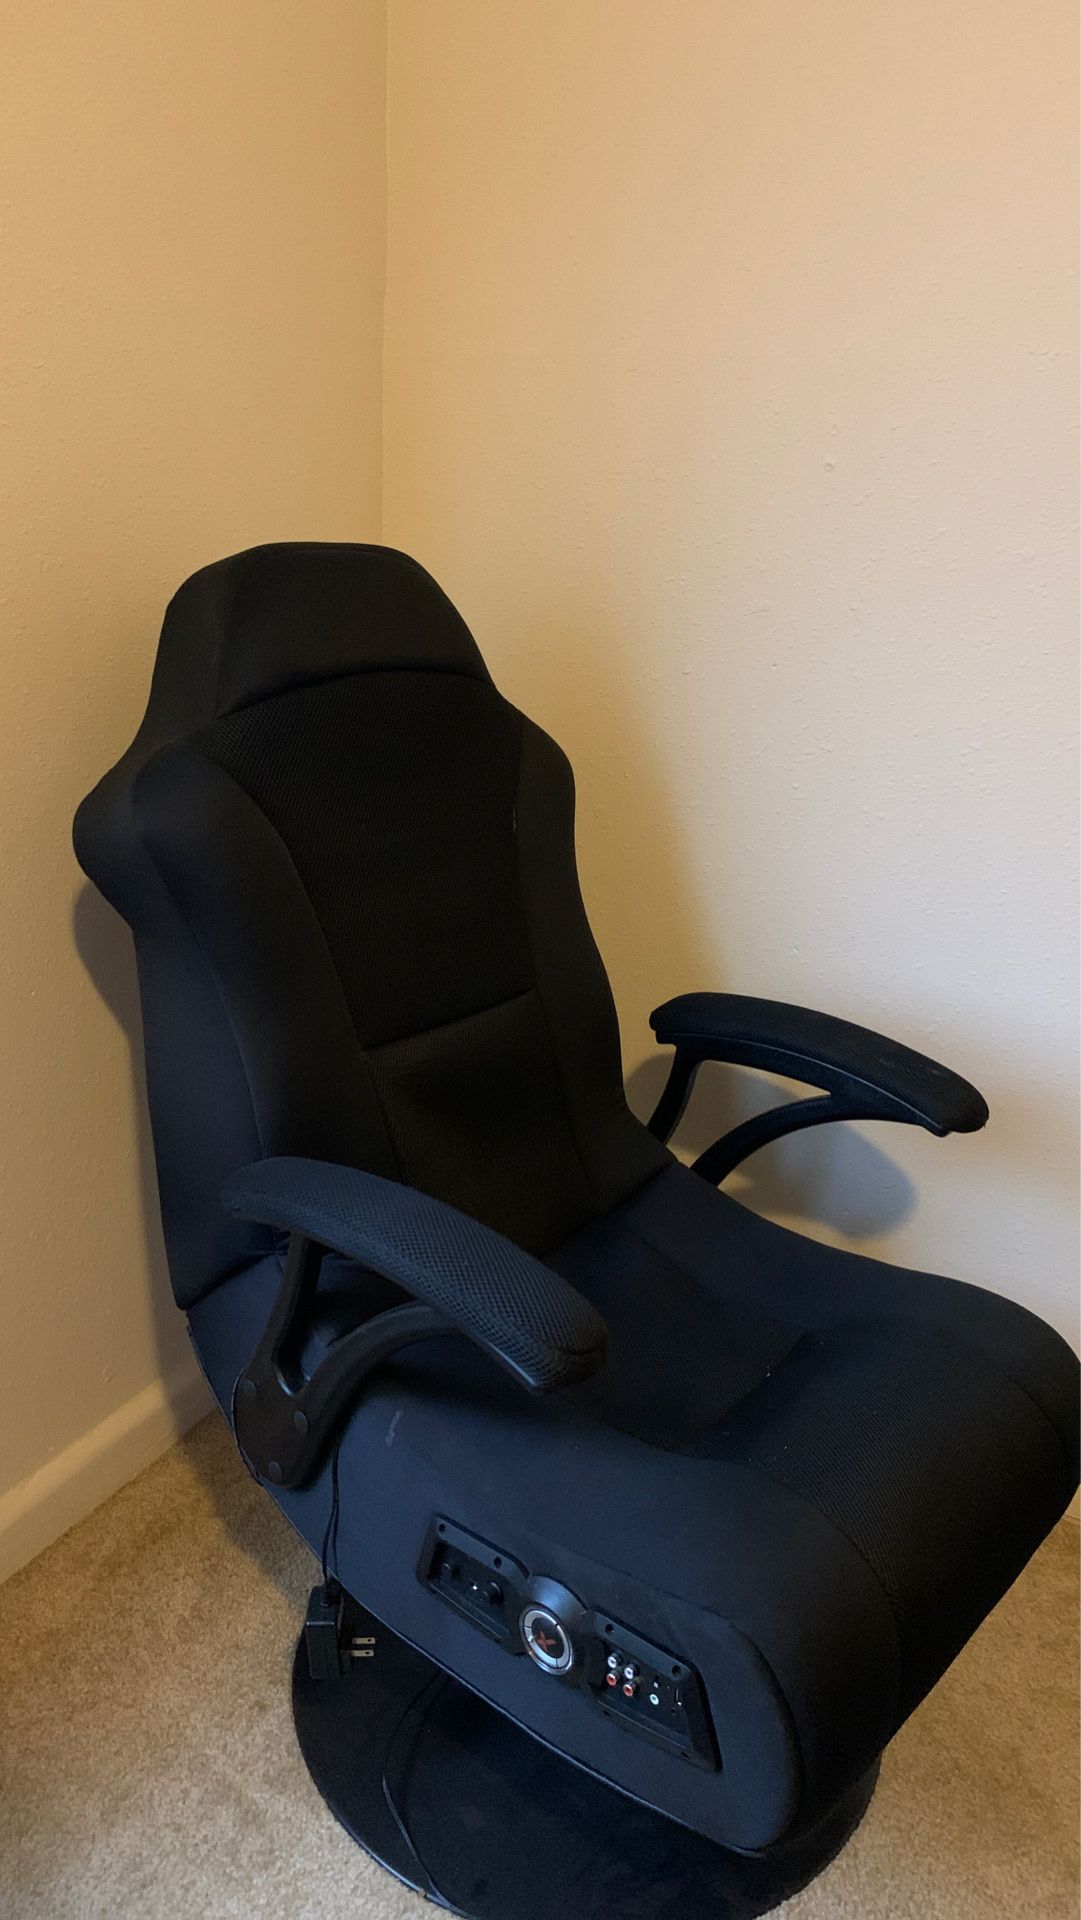 XRocker 2000 Series Gaming Chair (Accepting offers!)